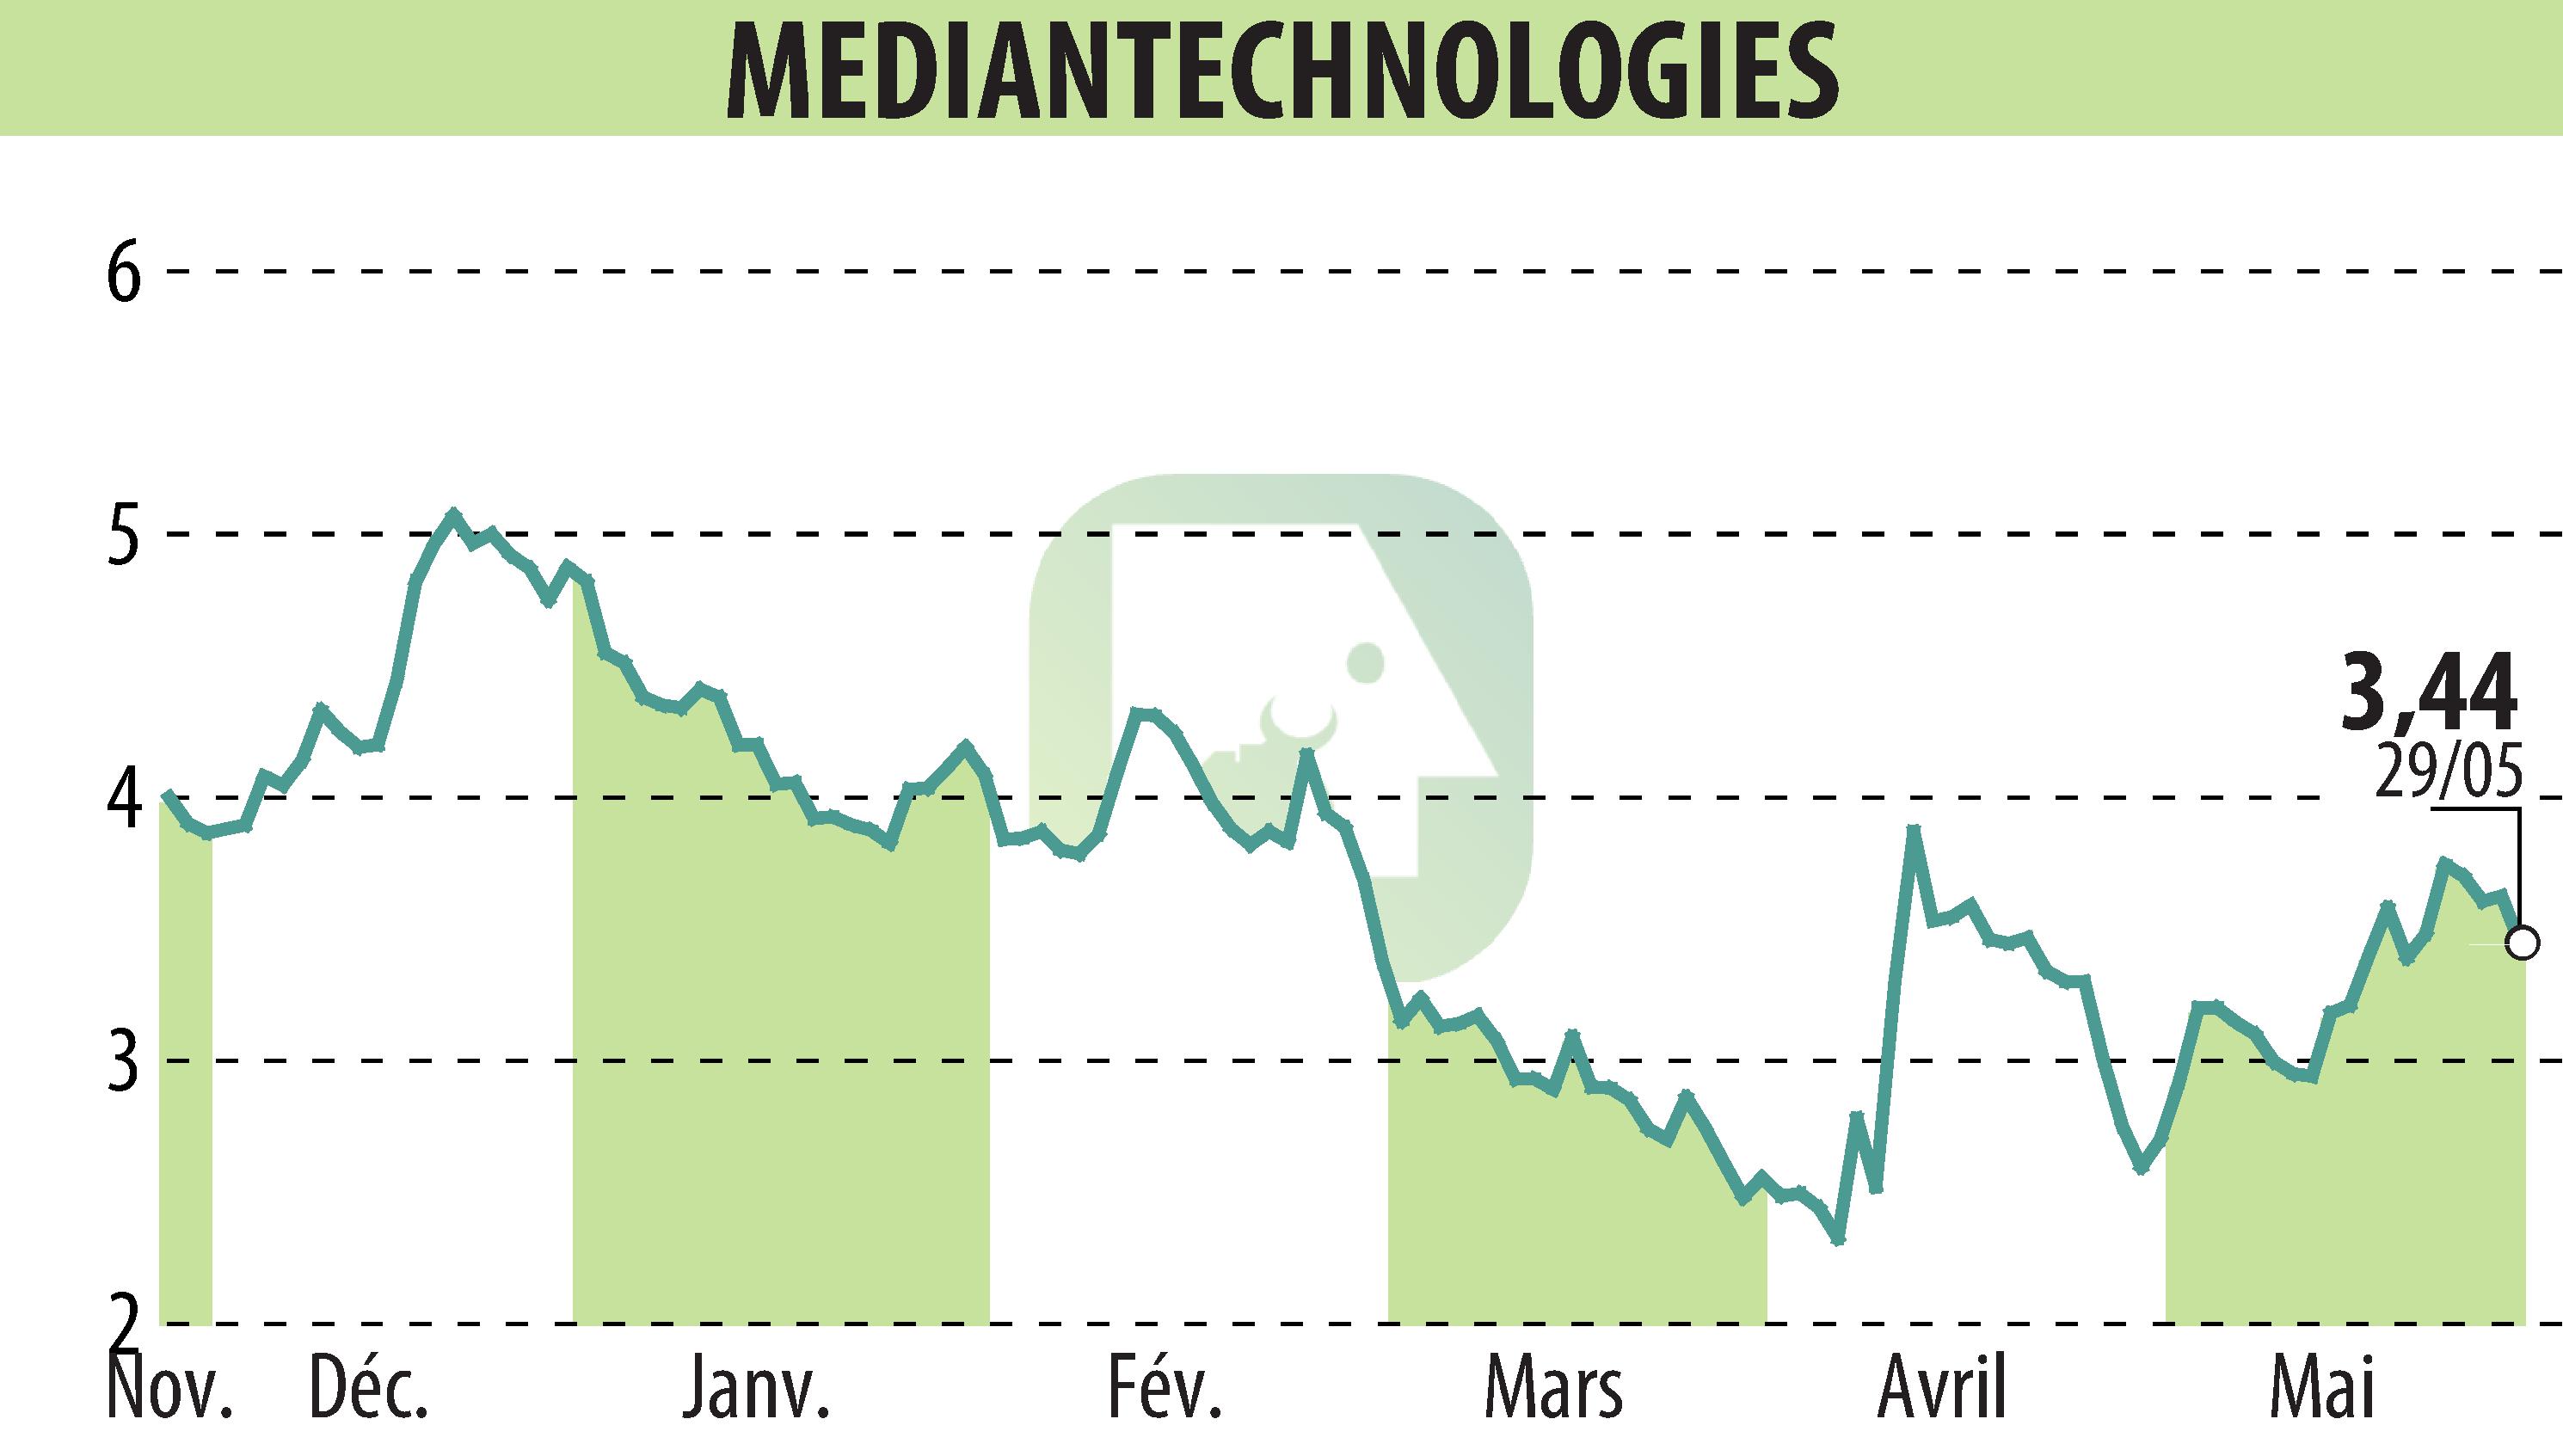 Stock price chart of MEDIAN TECHNOLOGIES (EPA:ALMDT) showing fluctuations.